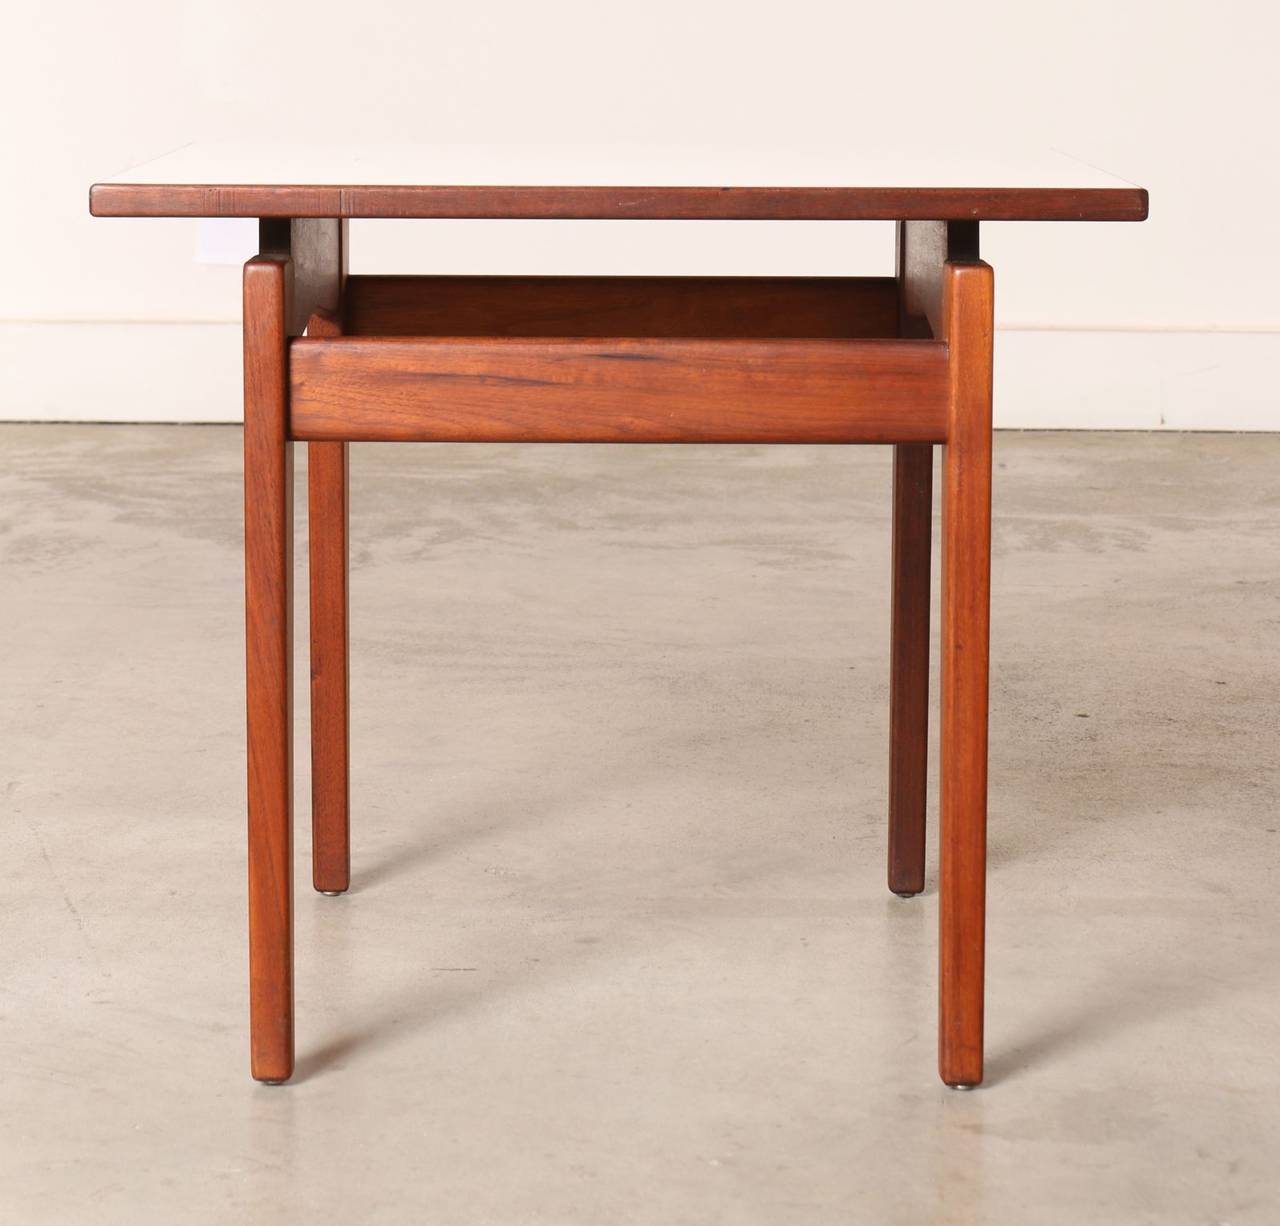 A stunning example of Jens Risom's artistry and craftsmanship. This side table by Jens Risom, Risom Design features a solid walnut frame and a walnut and white formica floating top that appears to be detached and floating. 

Recognized as a